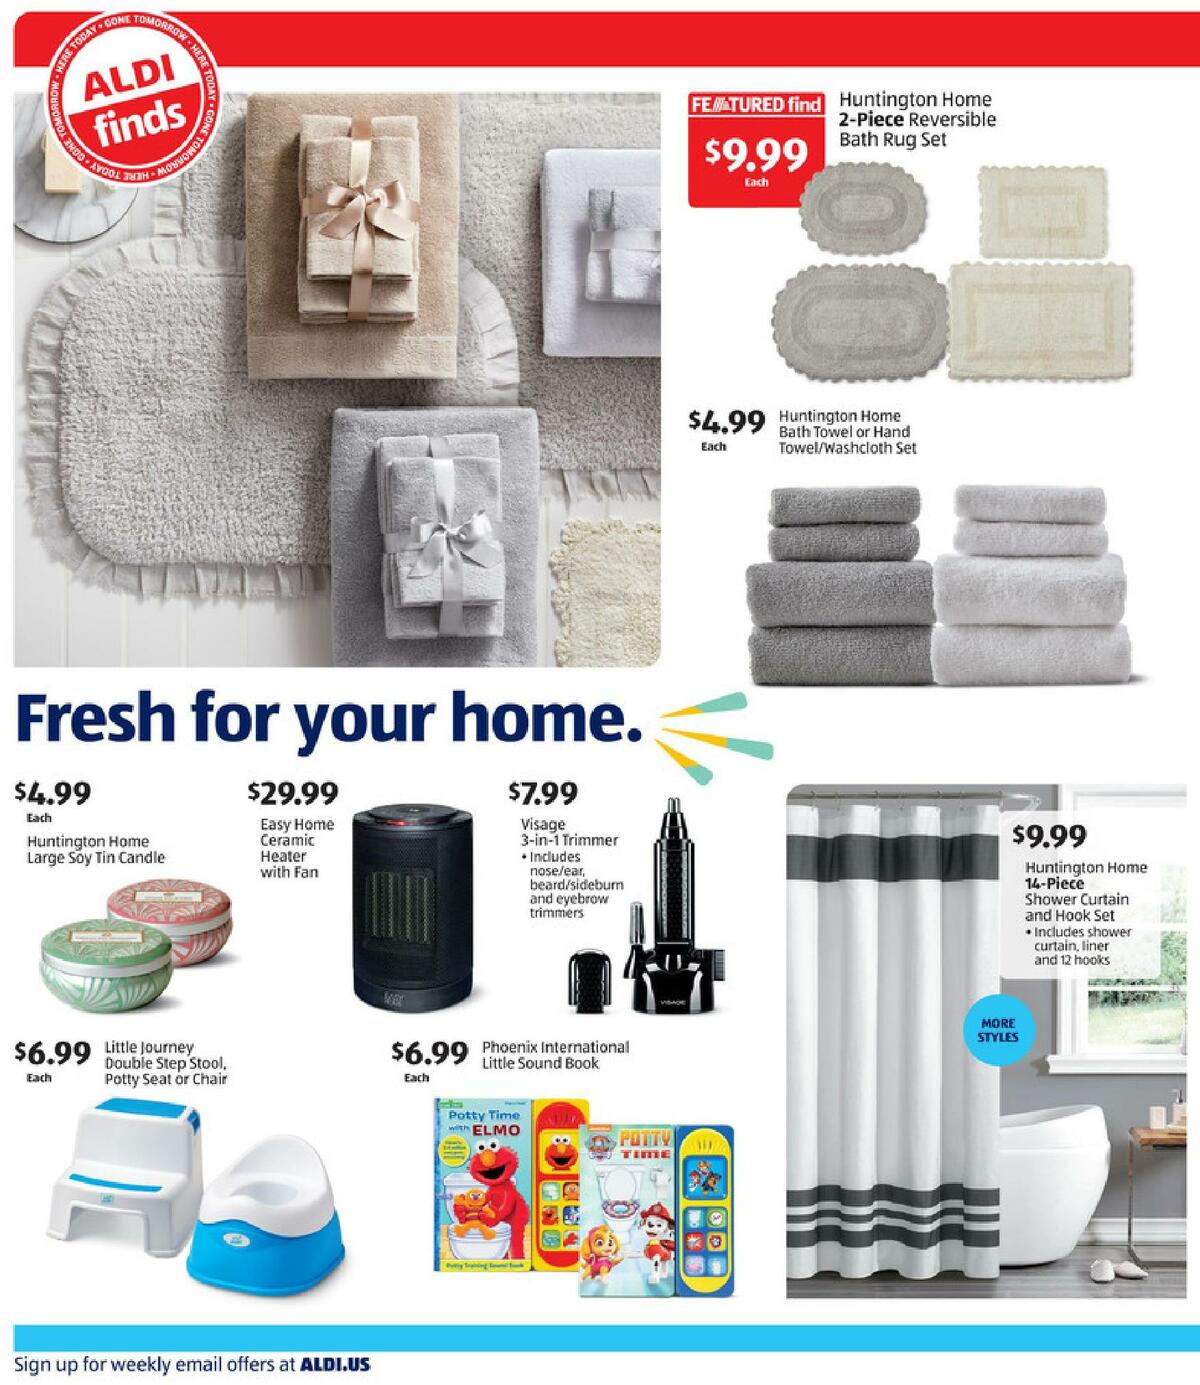 ALDI In Store Ad Weekly Ad from January 3